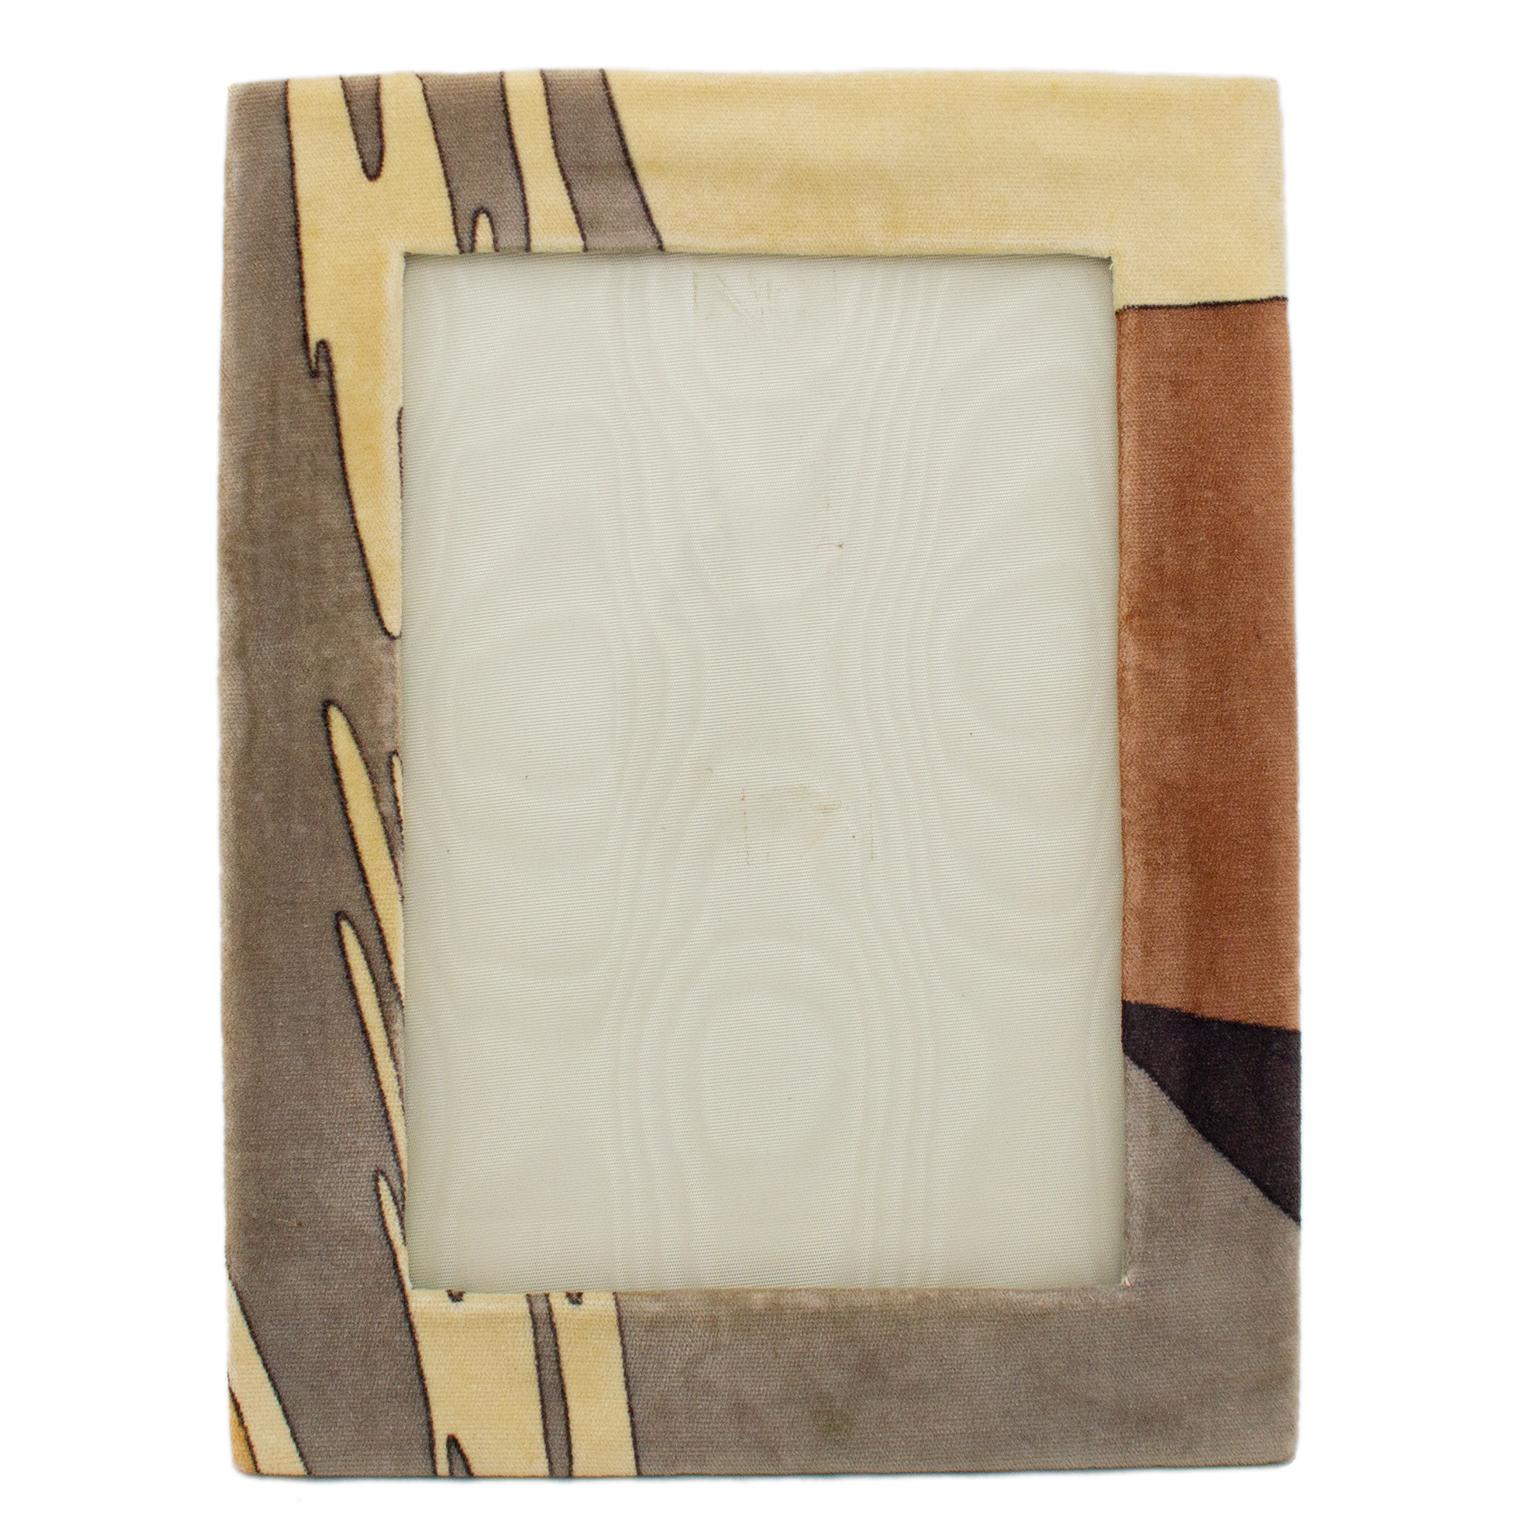 Fabulous Bessi picture frame from with 1970s. Abstract grey, cream, black and brown velvet frame. Back is stunning cream silk moiré, which makes this frame lovely to look at from any angle. Glass to cover the photo. Signed on back. Made in Italy